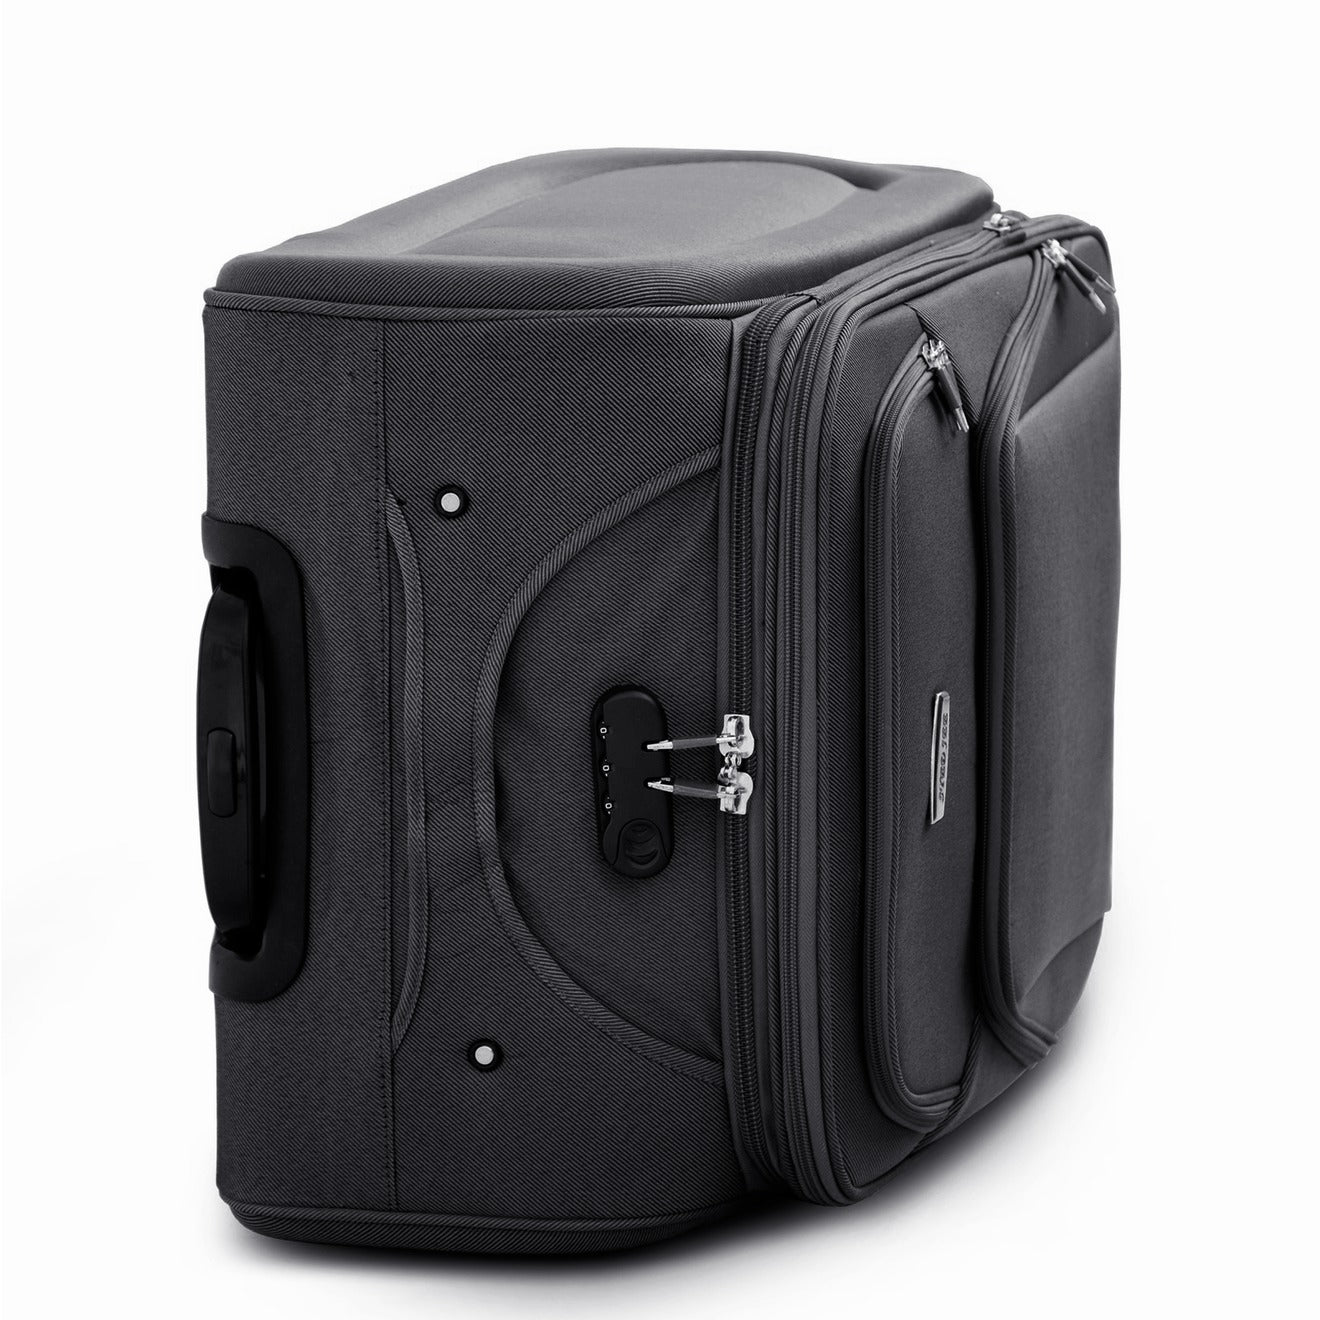 Soft Material Lightweight 10 Kg - 20 Inches JIAN 4 Wheel Black Luggage